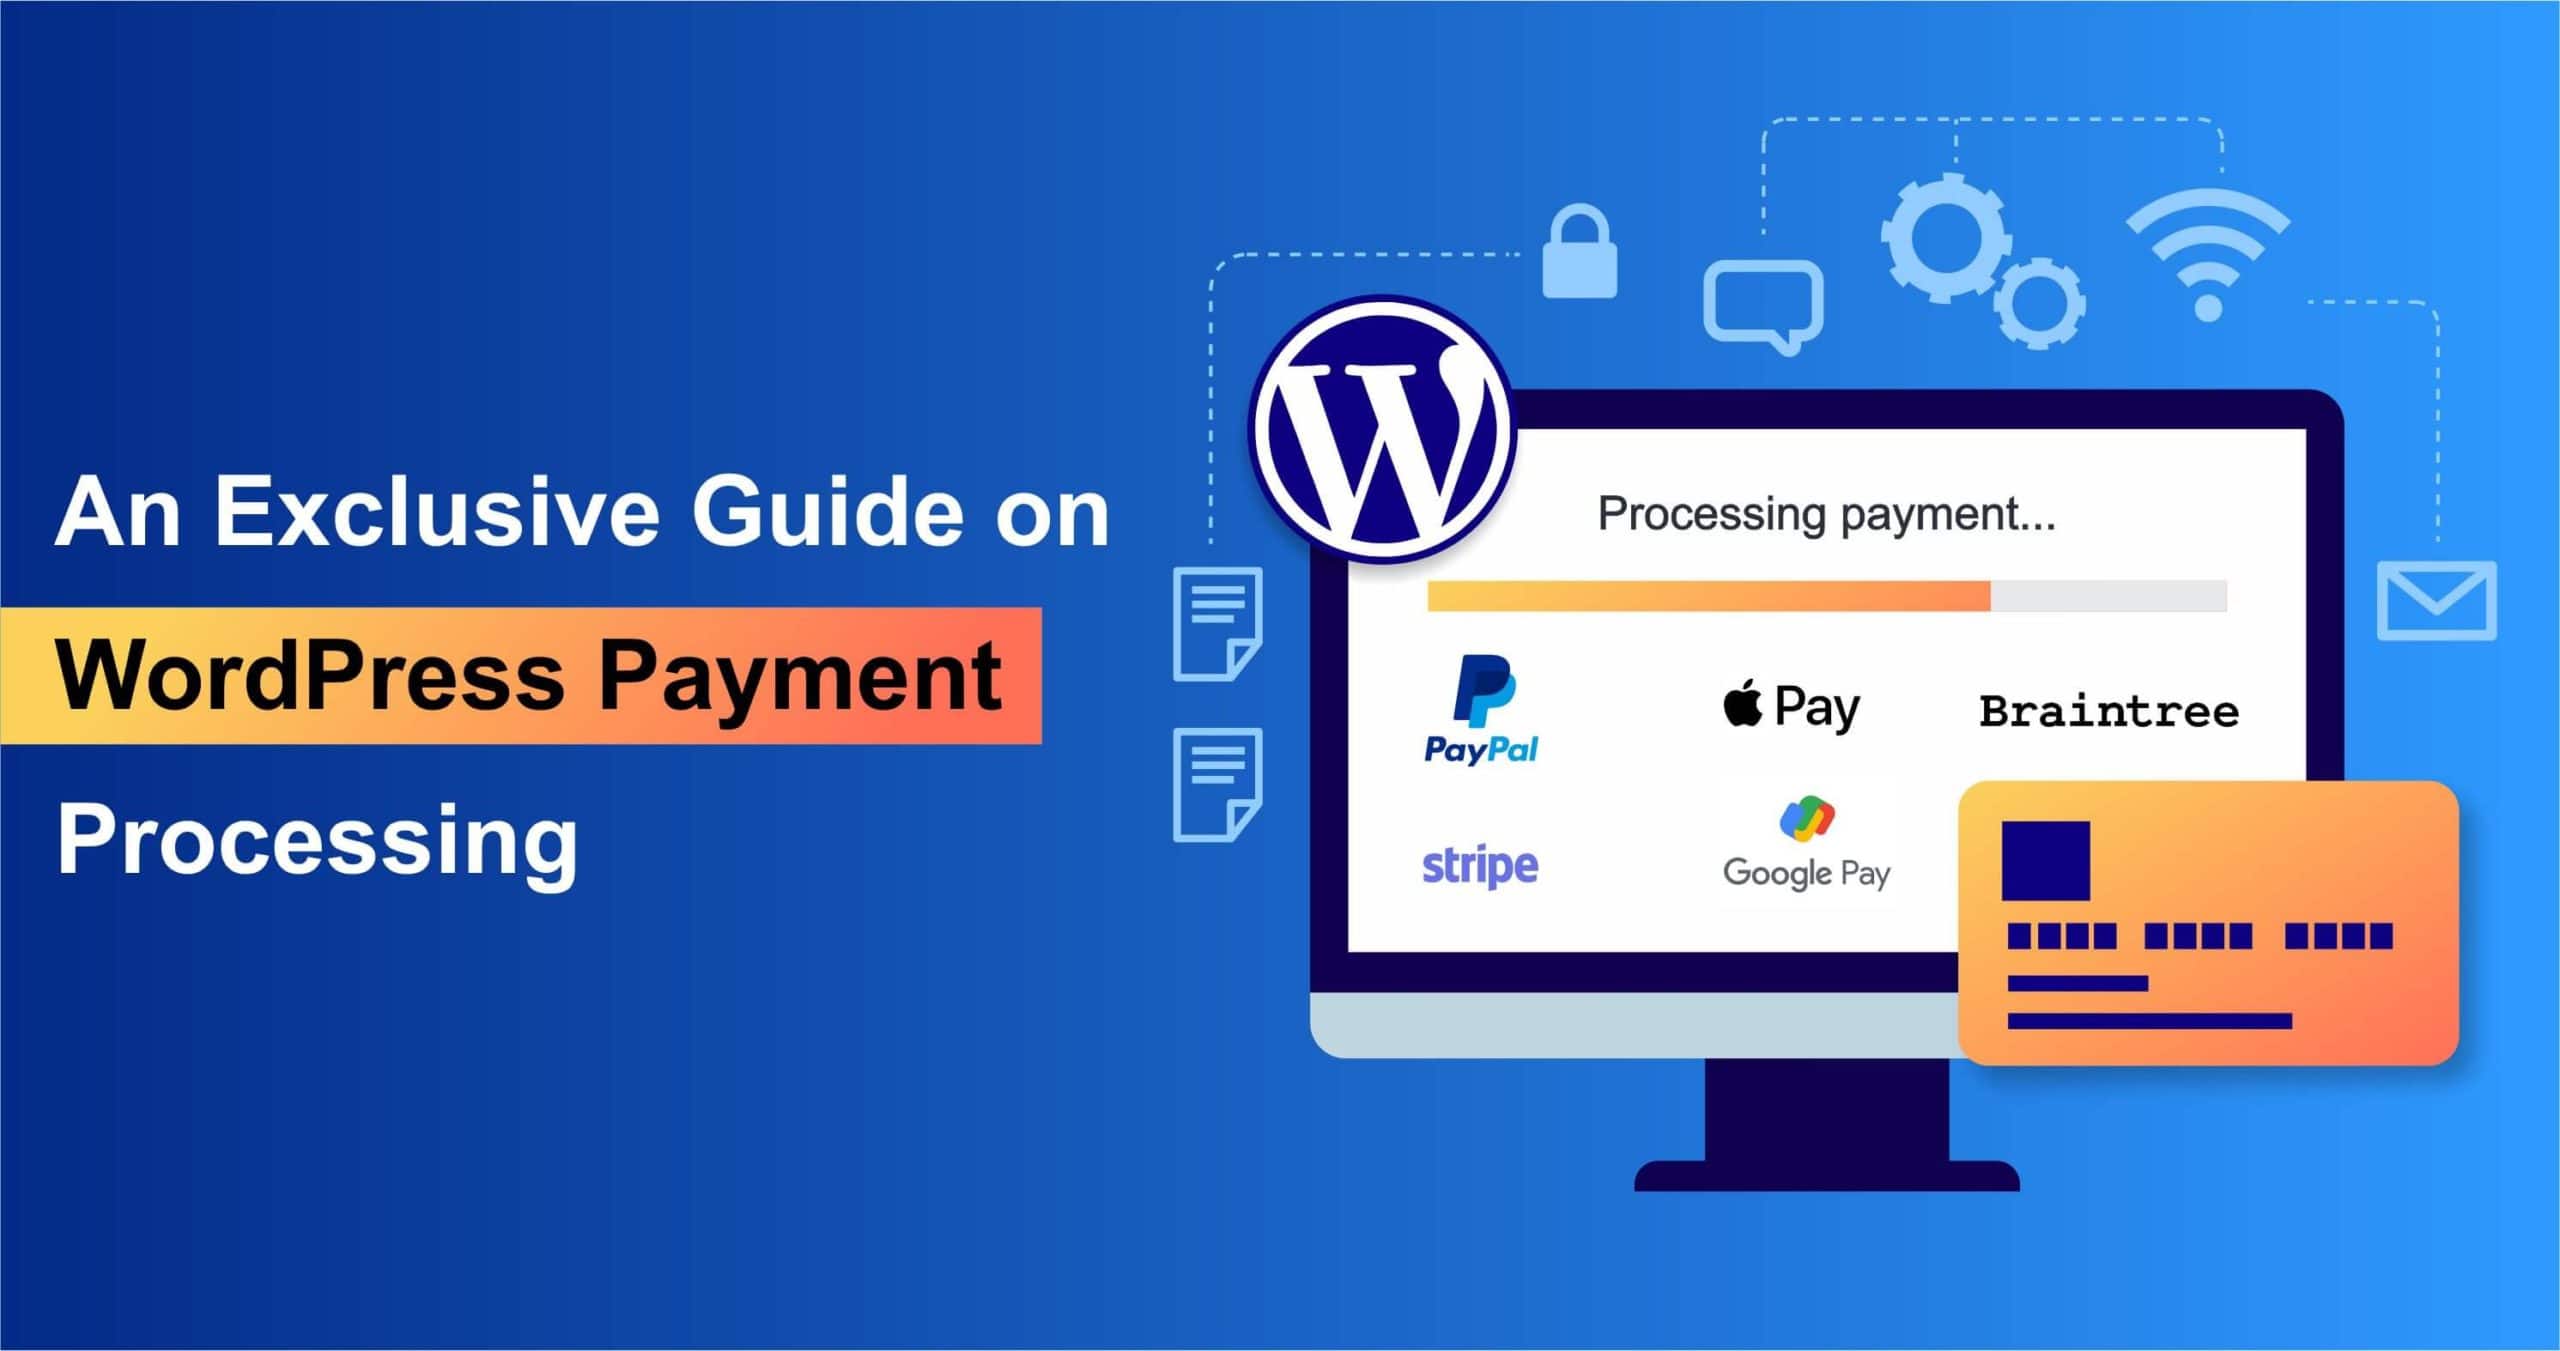 An exclusive guide on WordPress Payment Processing